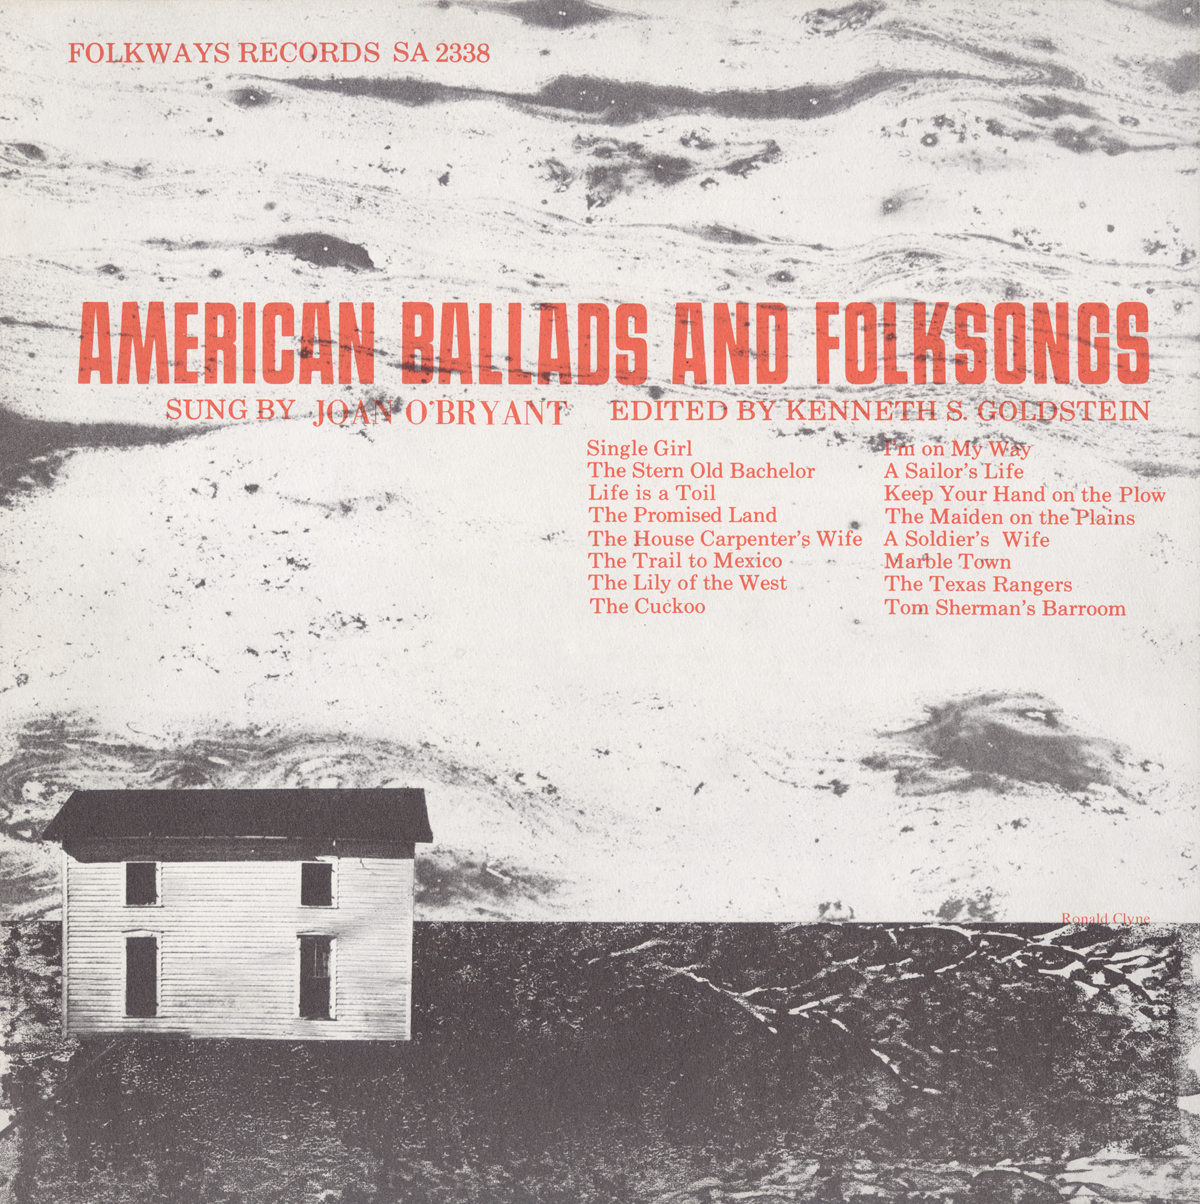 AMERICAN BALLADS AND FOLKSONGS